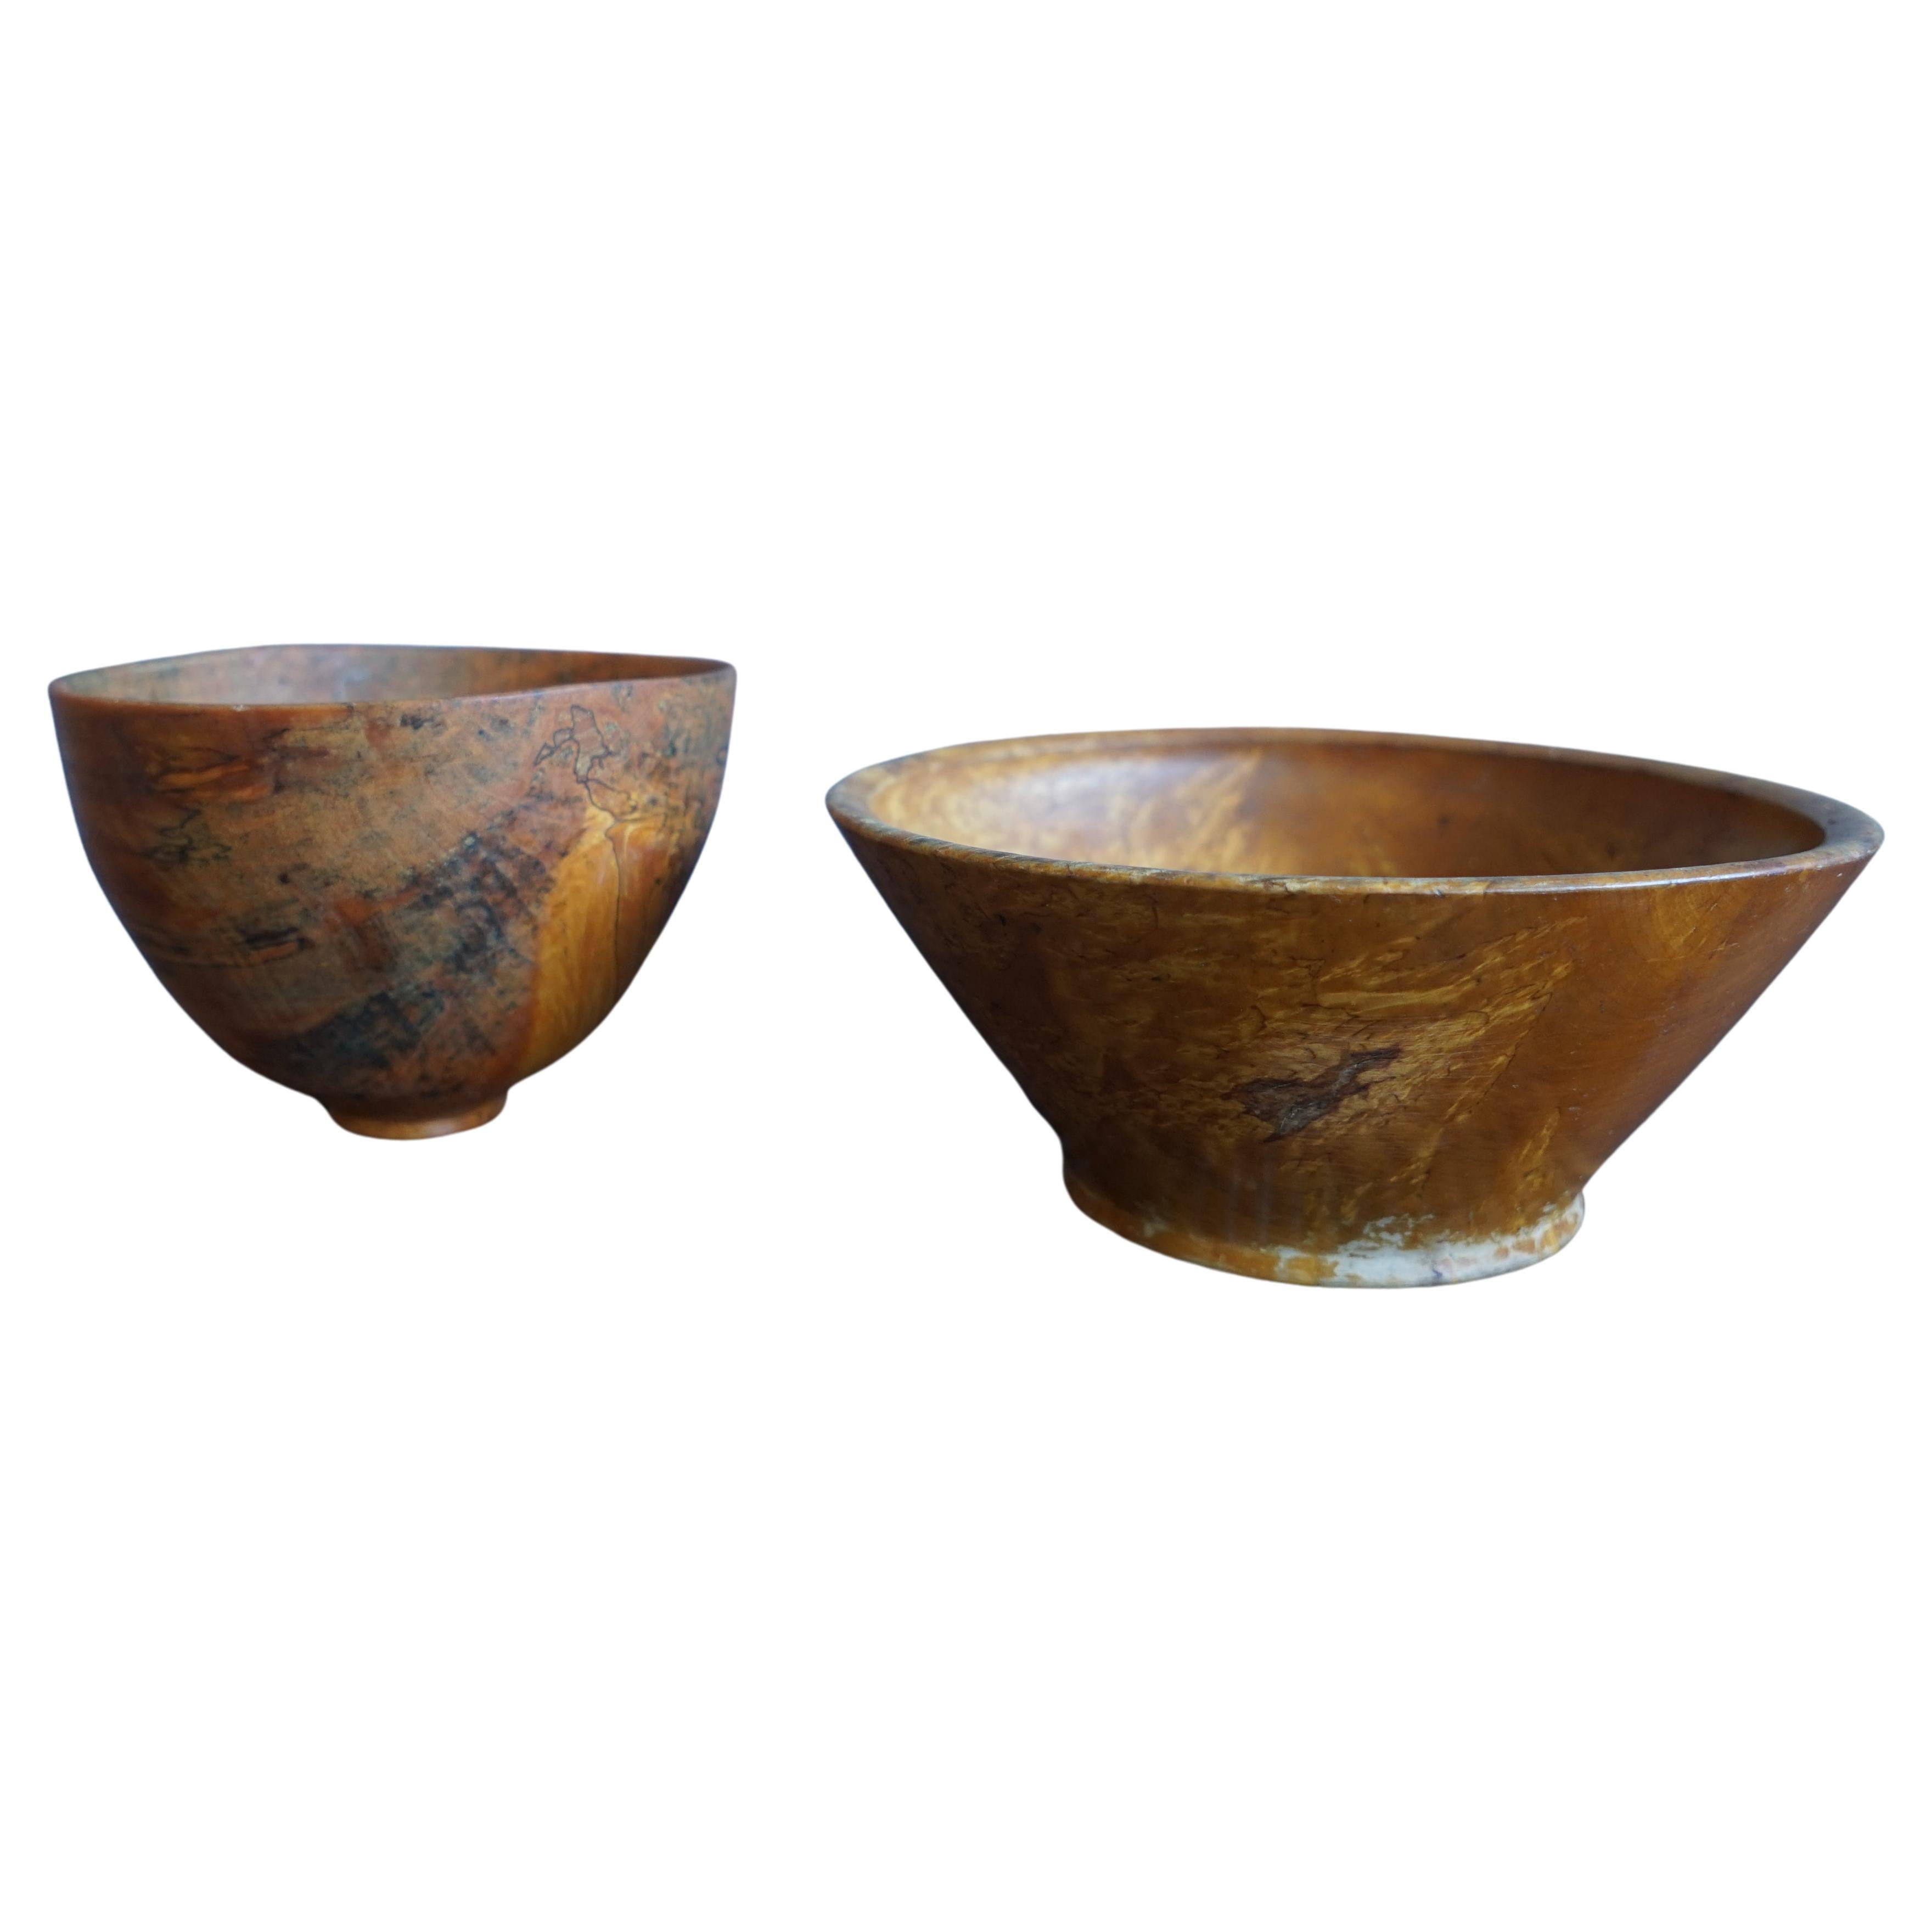 Pair of Swedish Wooden Bowls in BirdsEye Maple, 1940s For Sale